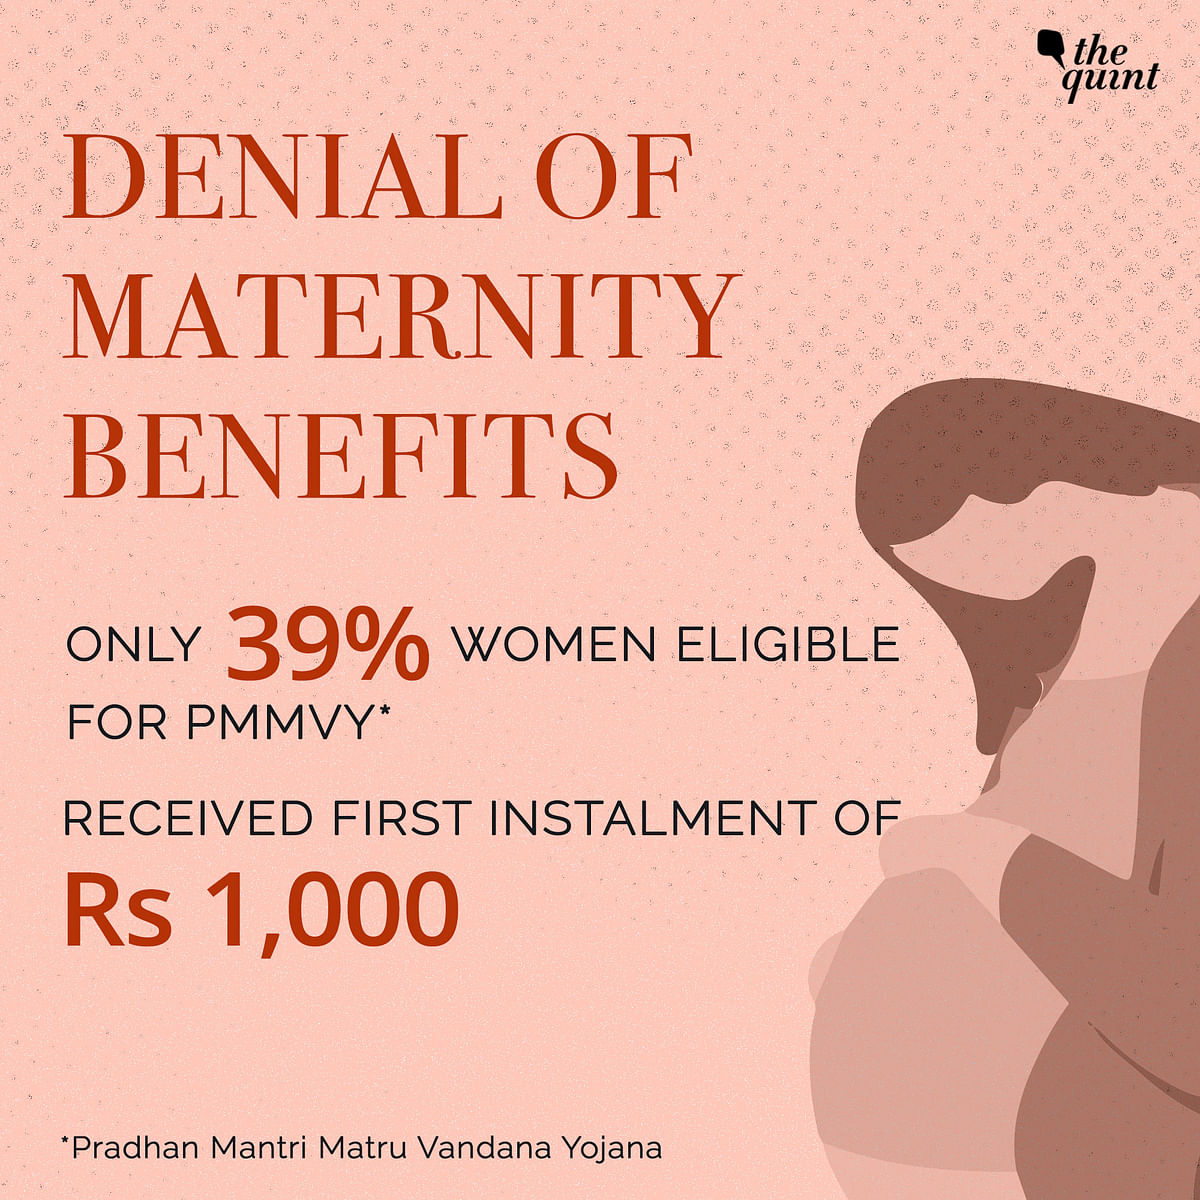 Government schemes meant to give maternity entitlements have failed women beneficiaries on the ground.